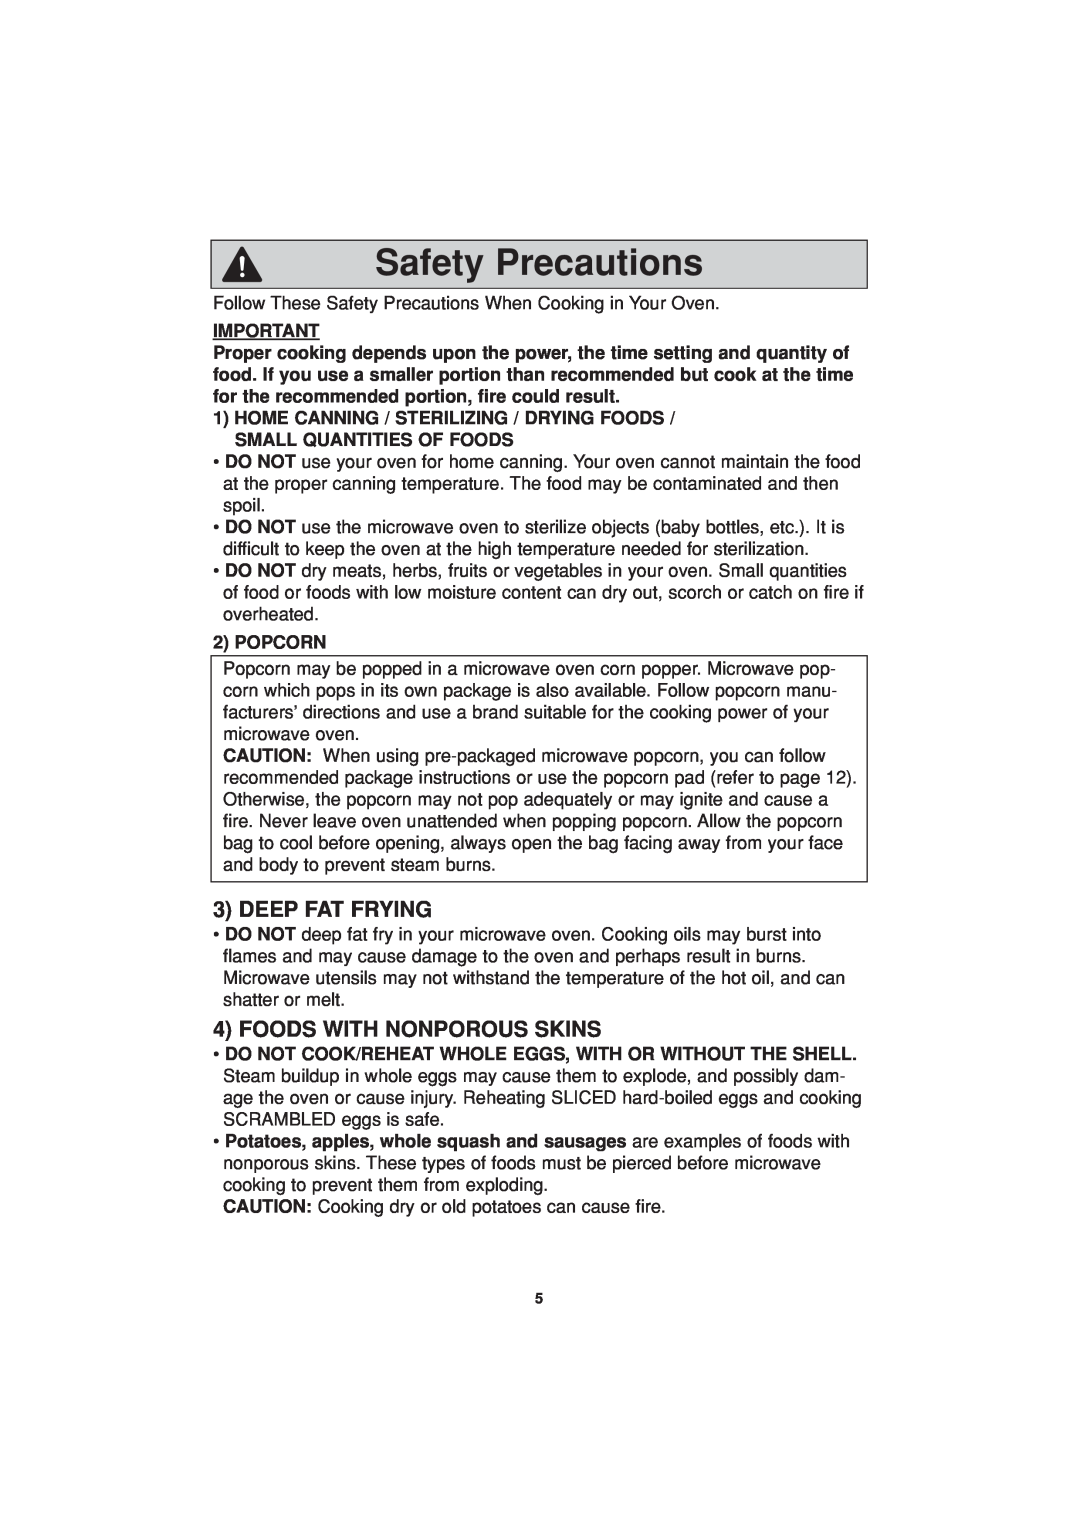 Panasonic NN-H634, NN-H644 important safety instructions Safety Precautions, Deep Fat Frying, Foods With Nonporous Skins 